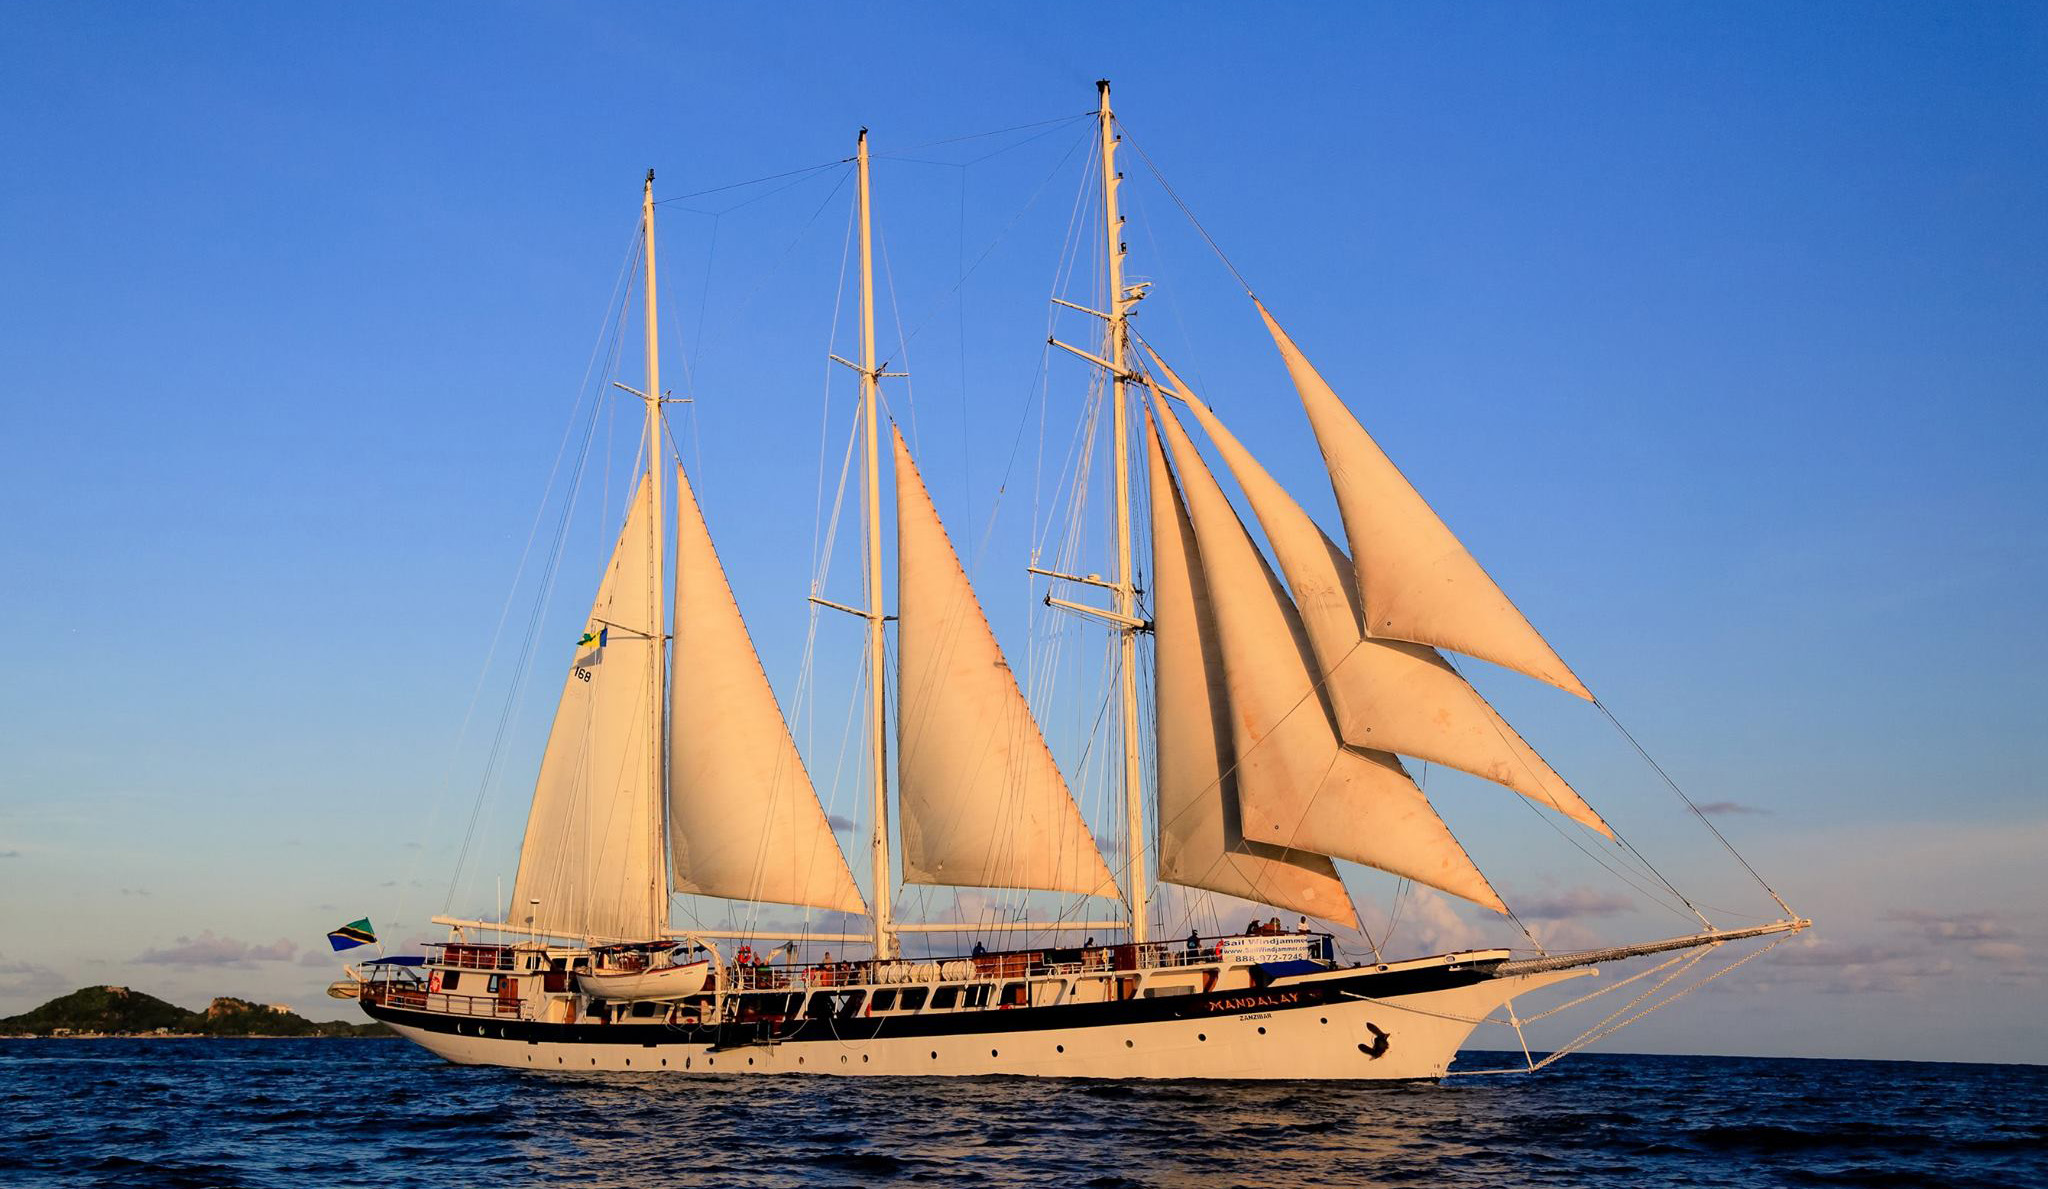 Adventure Travel Cruise with Top Models to Grenada on 236-foot Schooner : November 12 - 18th, 2017